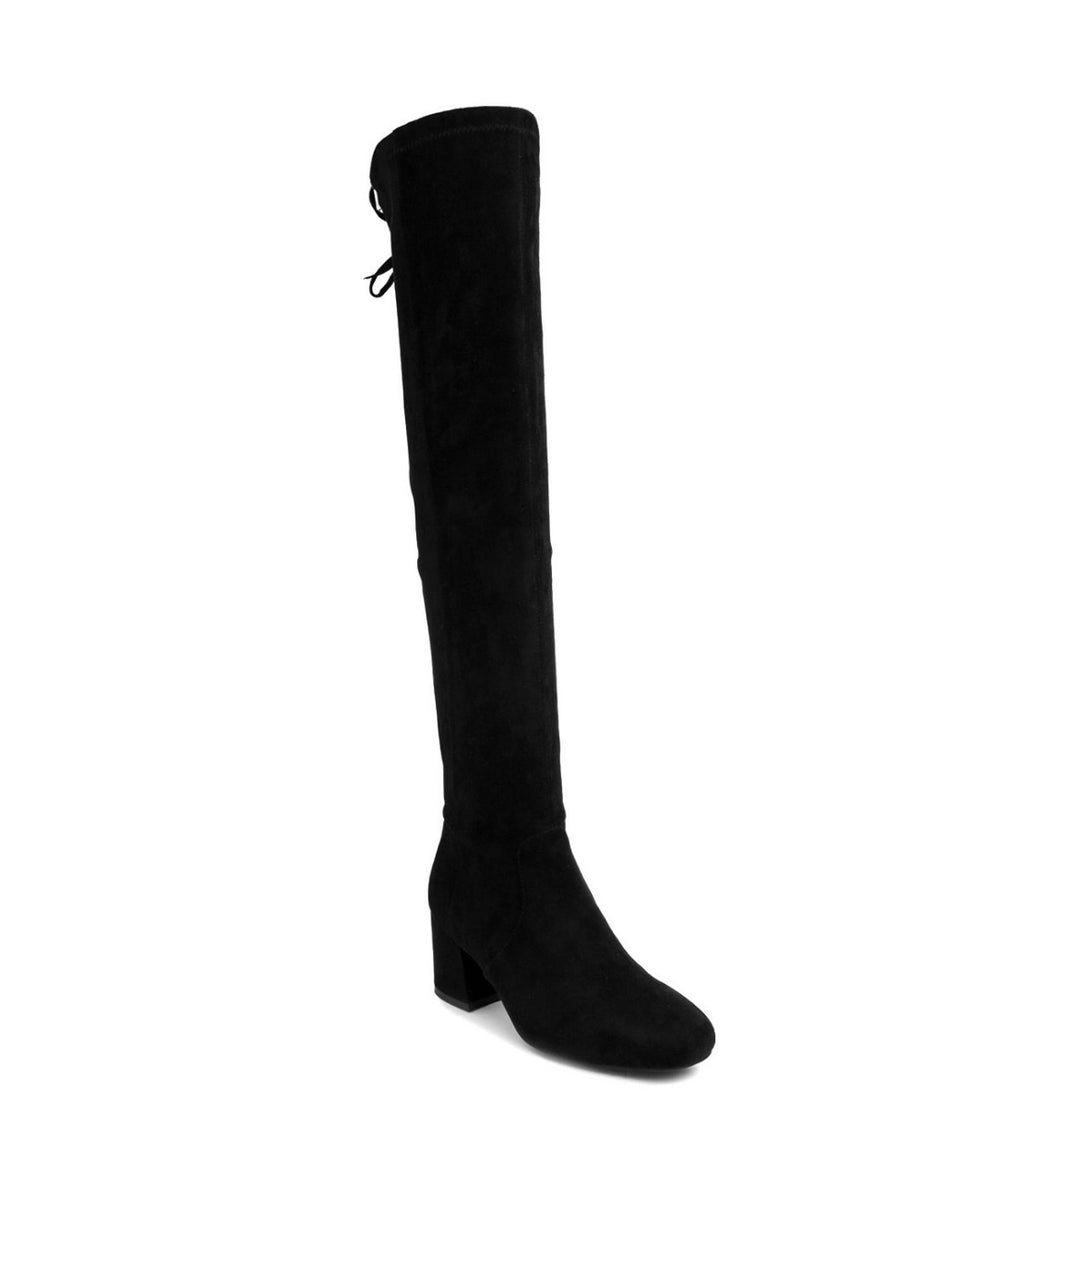 Sugar Women's Ollie Heels Round Toe Over-The-Knee Boots Black